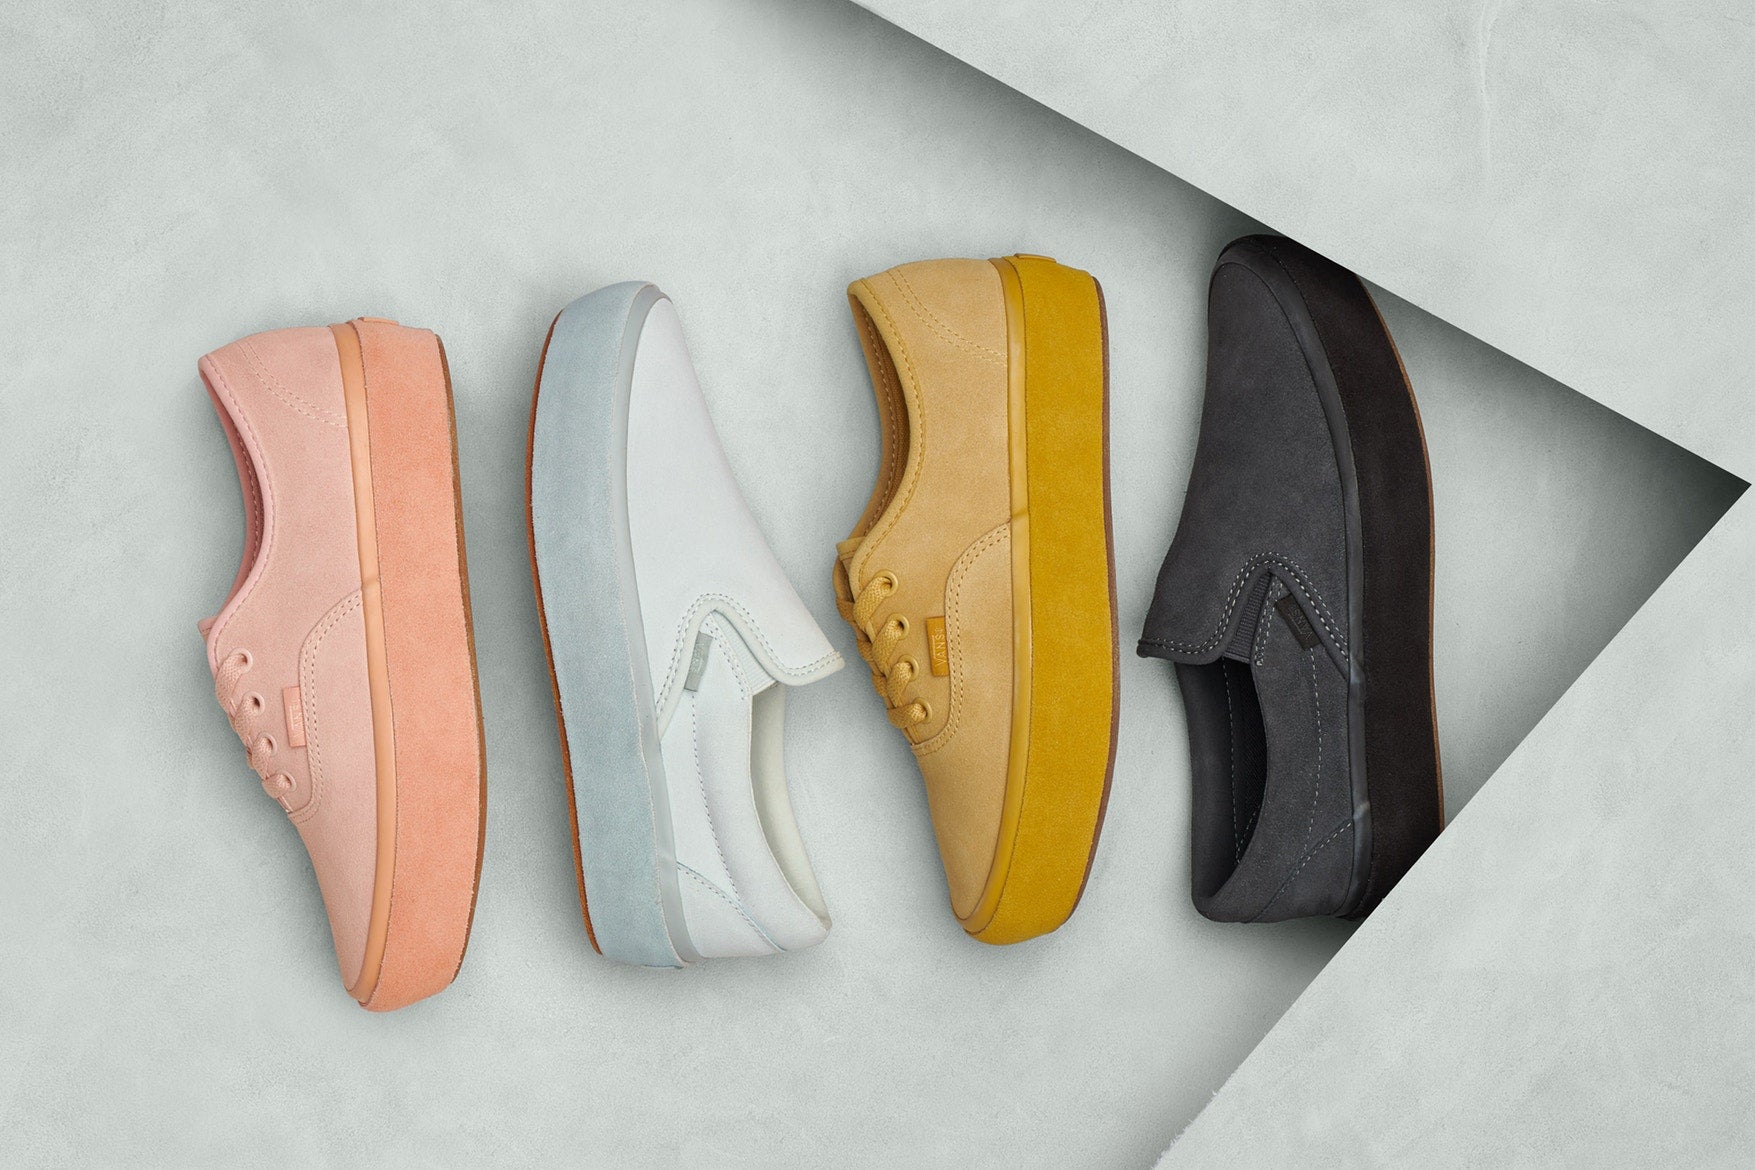 SNEAKER RELEASES | Vans Platform Suede Outsole Pack | February 1